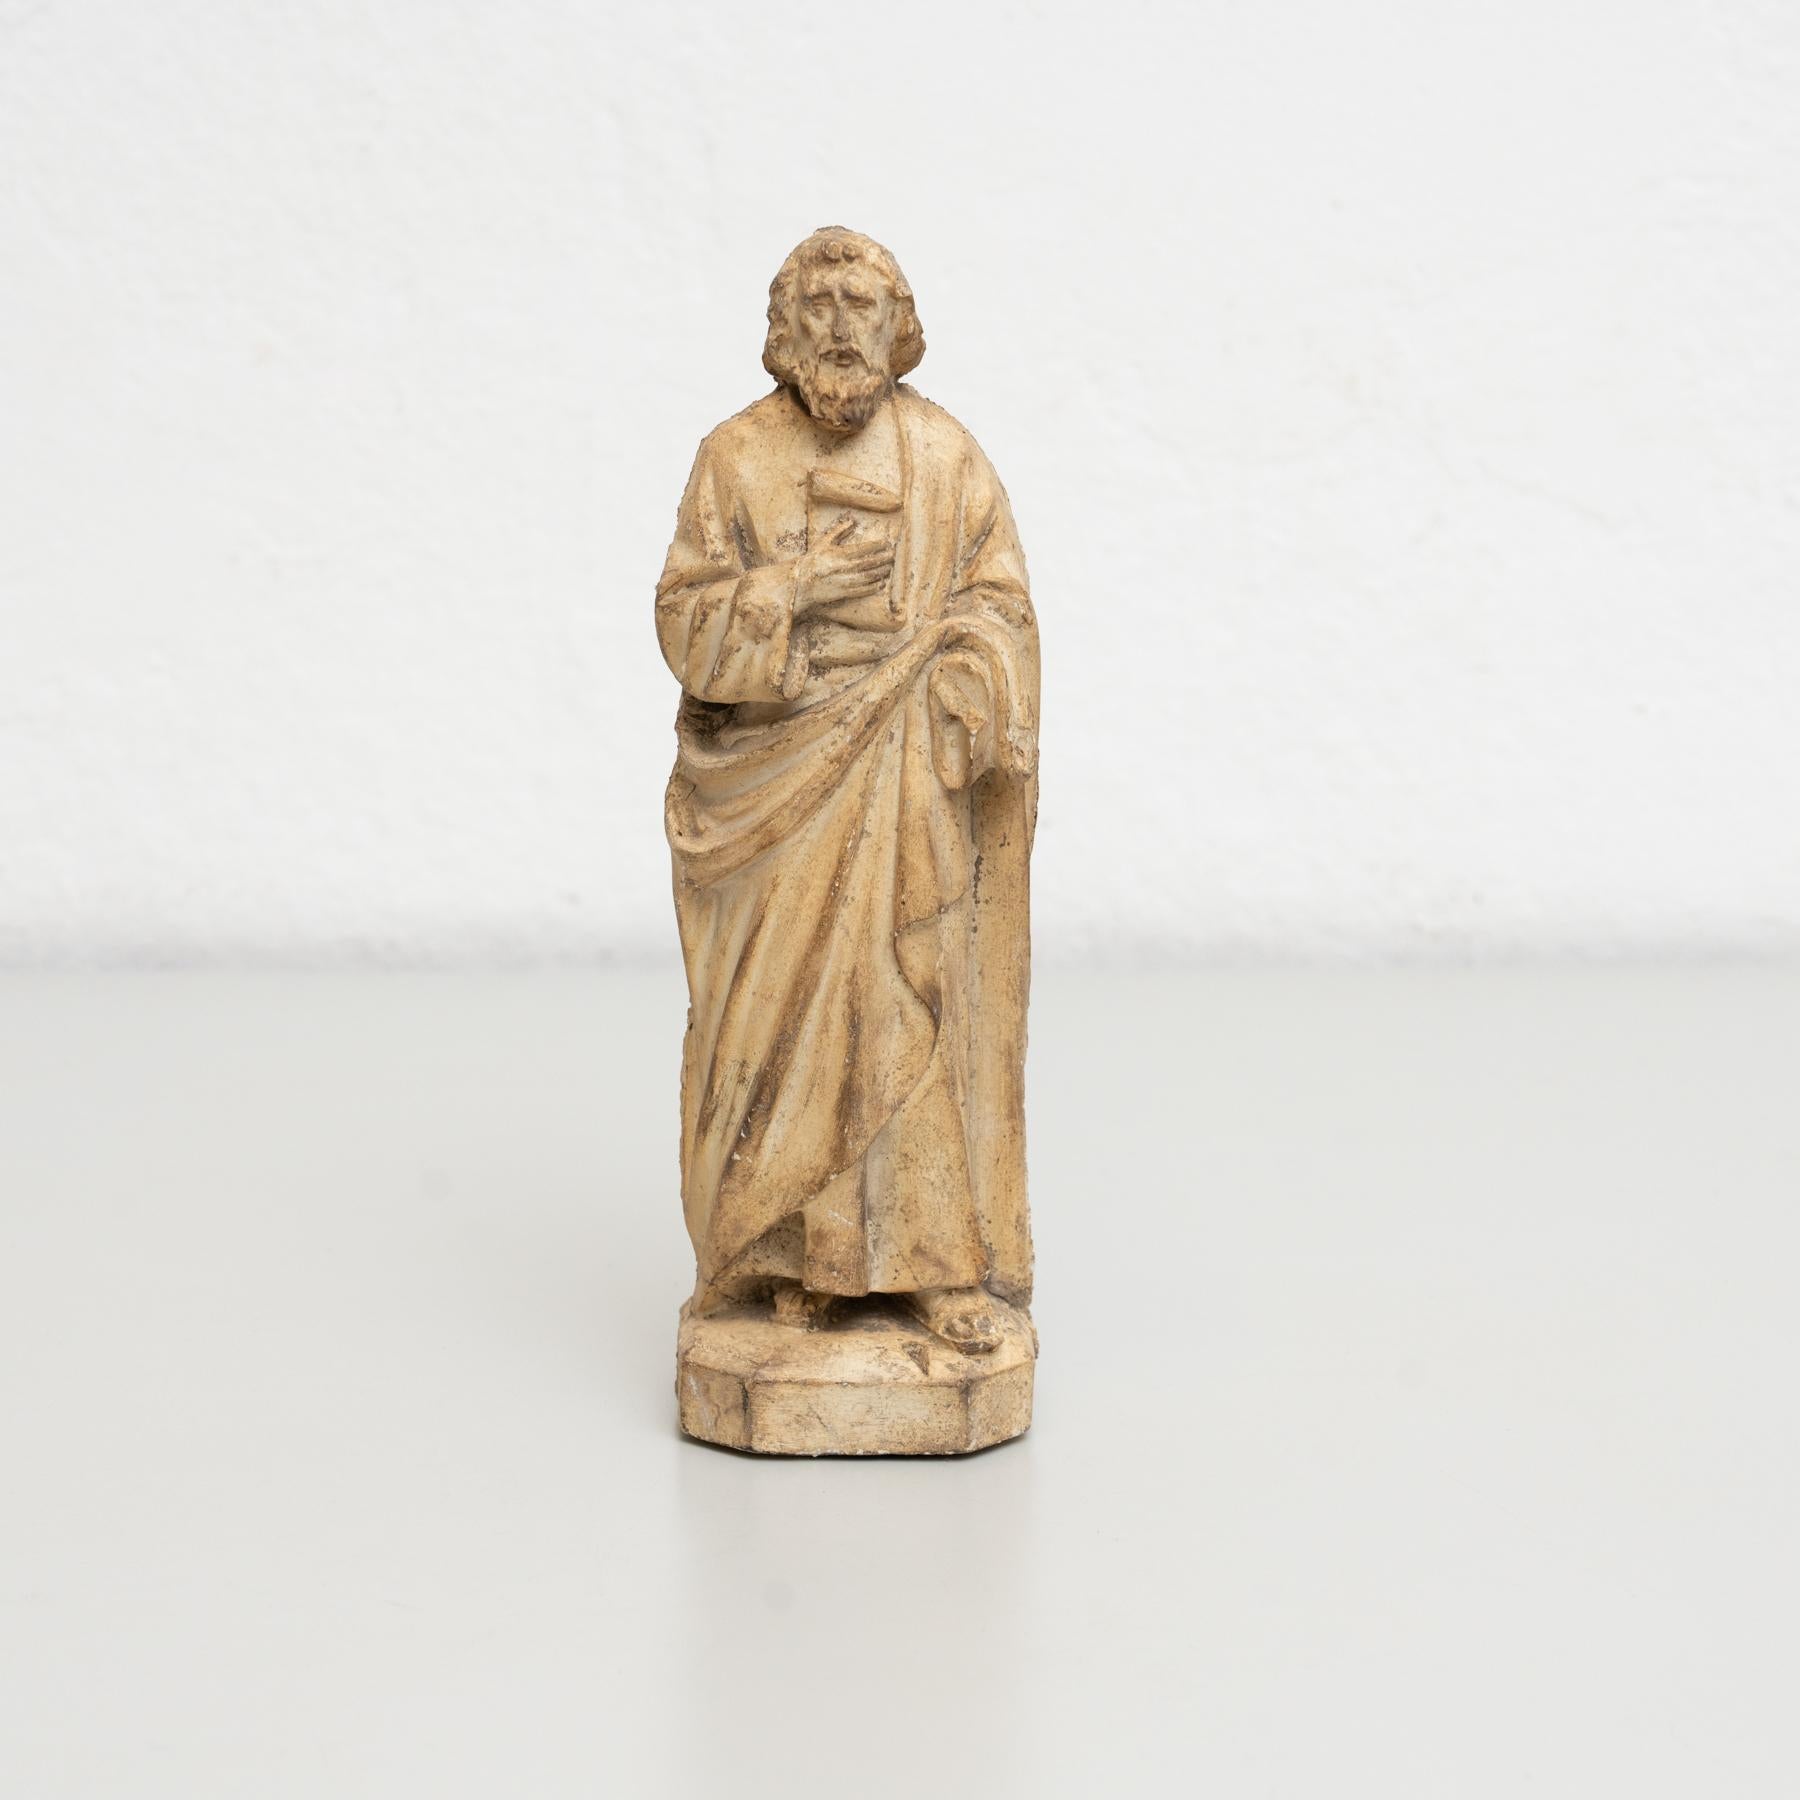 Traditional religious plaster figure of a saint.

Made in traditional Catalan atelier in Olot, Spain, circa 1950.

In original condition, with minor wear consistent with age and use, preserving a beautiful patina.

Materials:
Plaster.
 